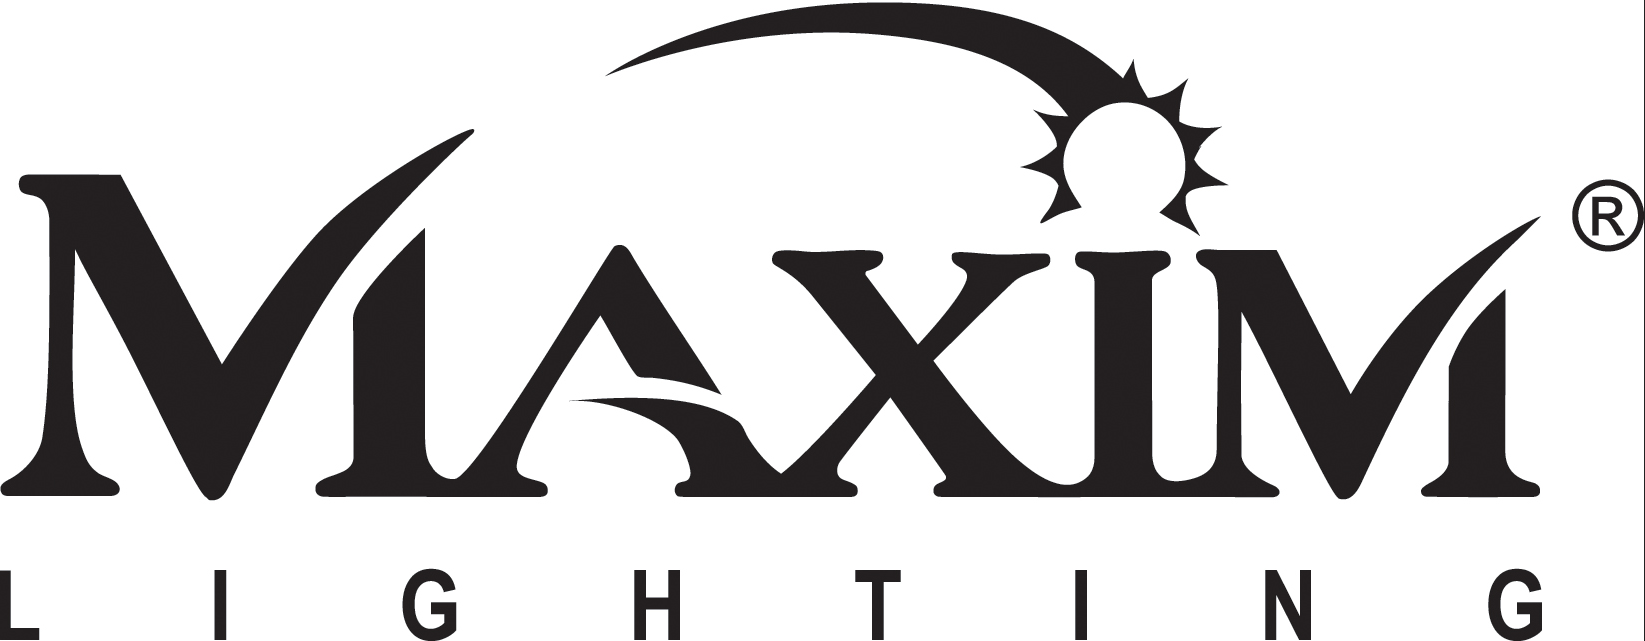 It is a black and white logo for maxim lighting.